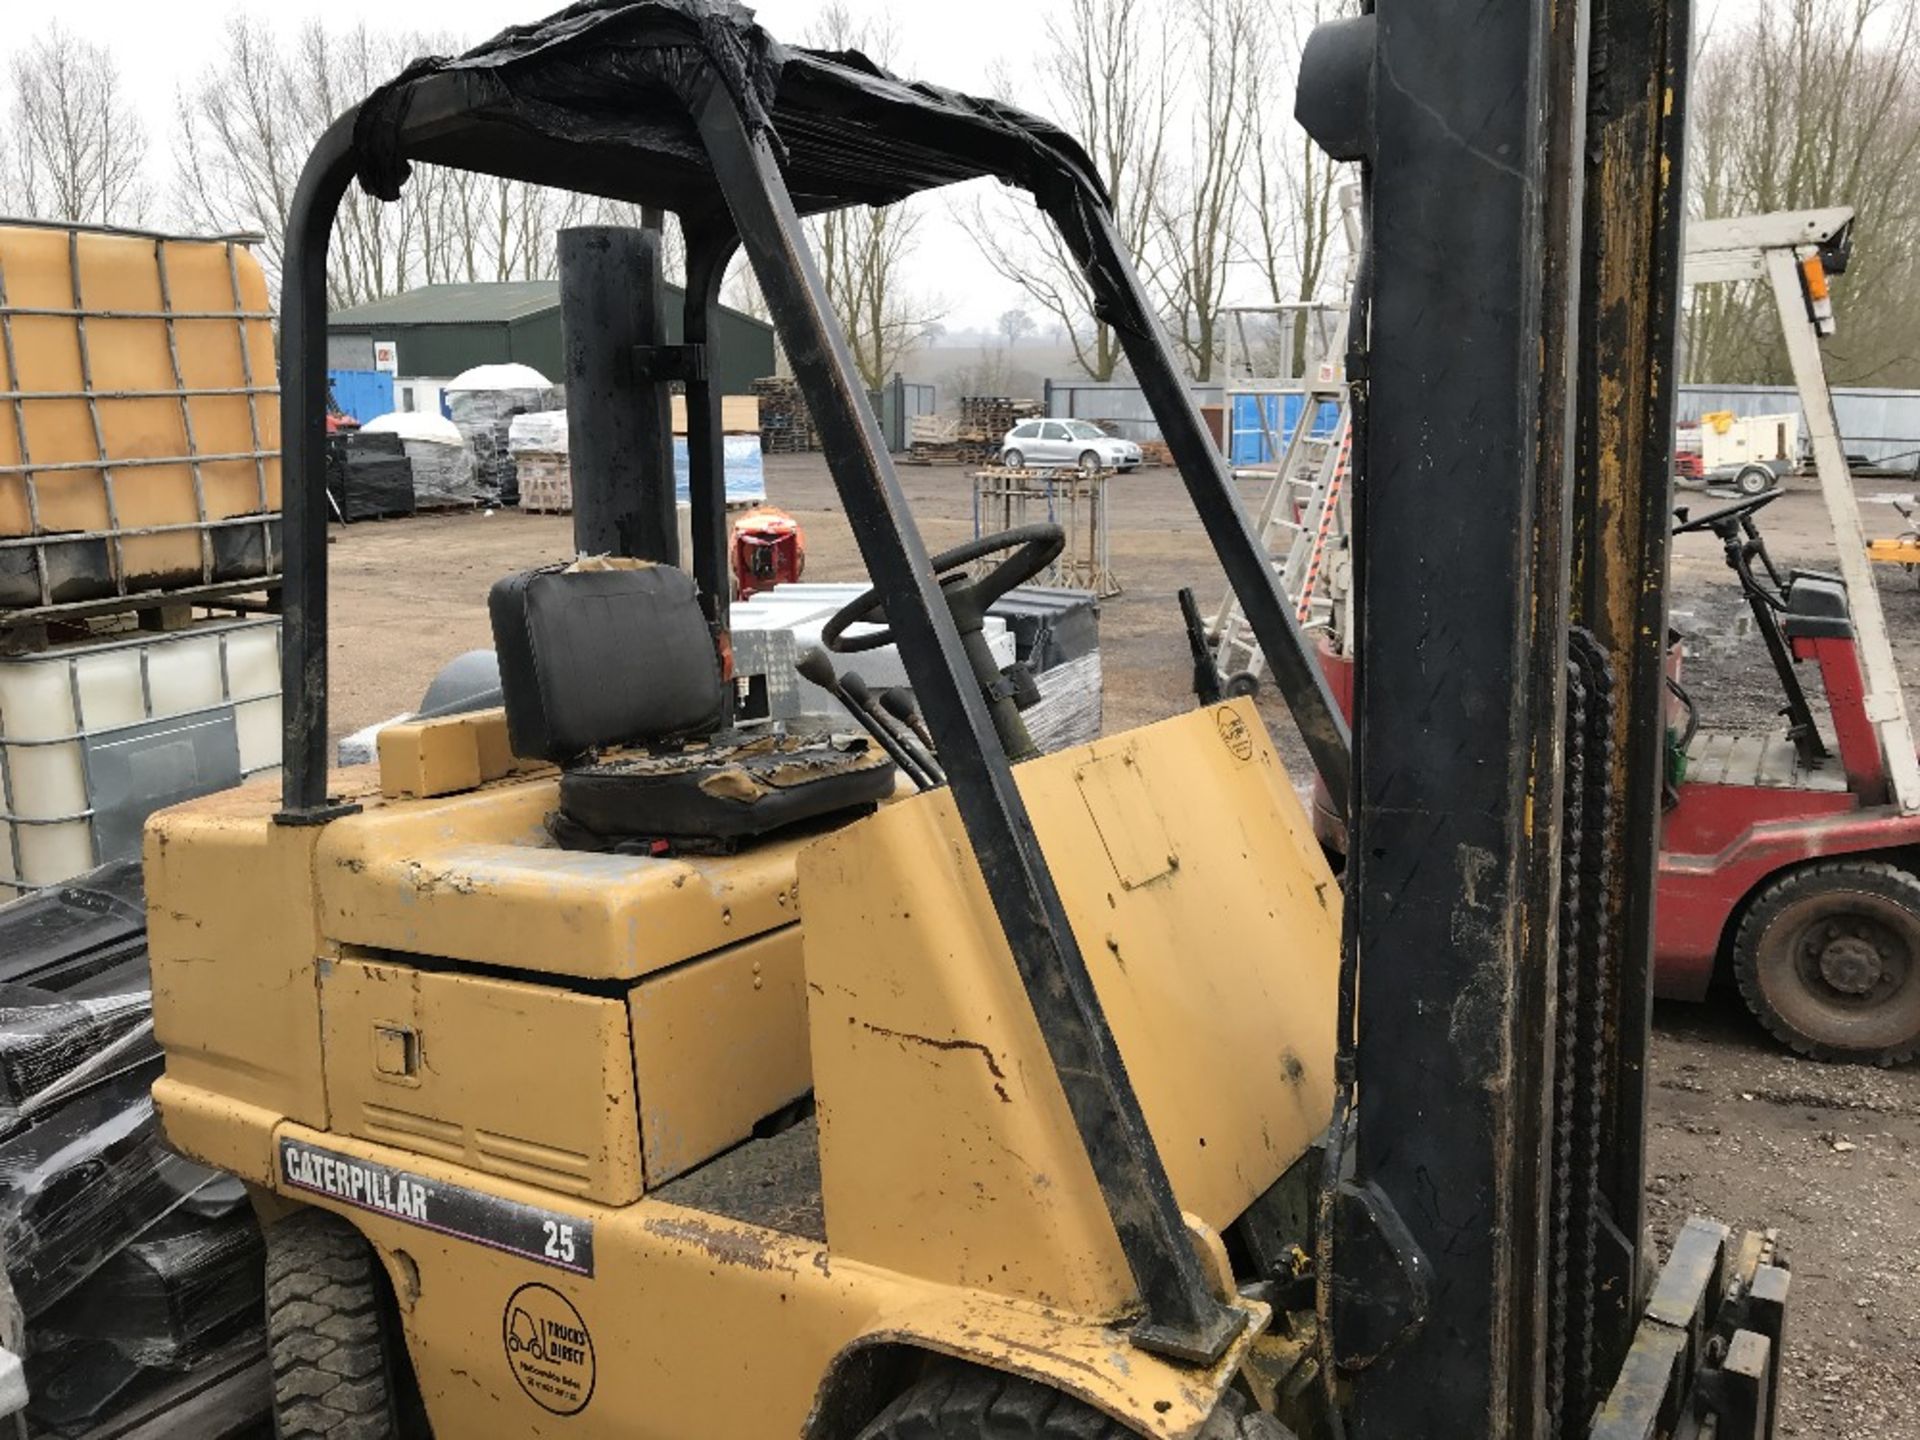 Caterpillar 25 diesel forklift SN;07900941/6 WHEN TESTED, TURNED OVER BUT NOT STARTING